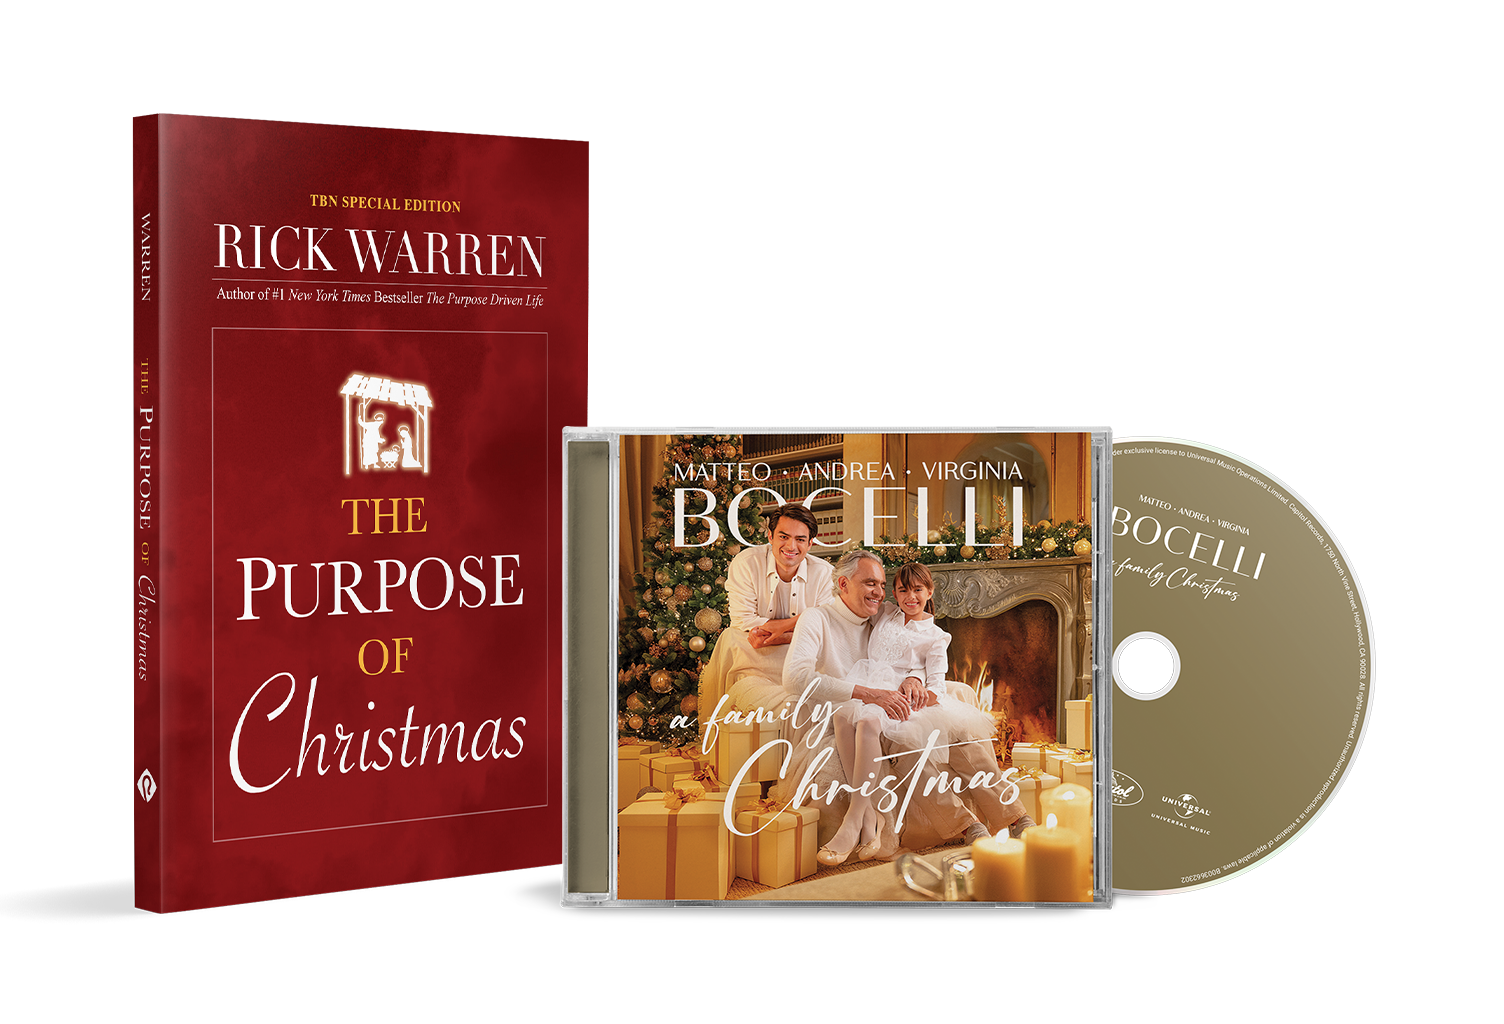 Receive The Purpose of Christmas by Rick Warren and holiday music CD Bocelli: A Family Christmas by Andrea Bocelli from TBN